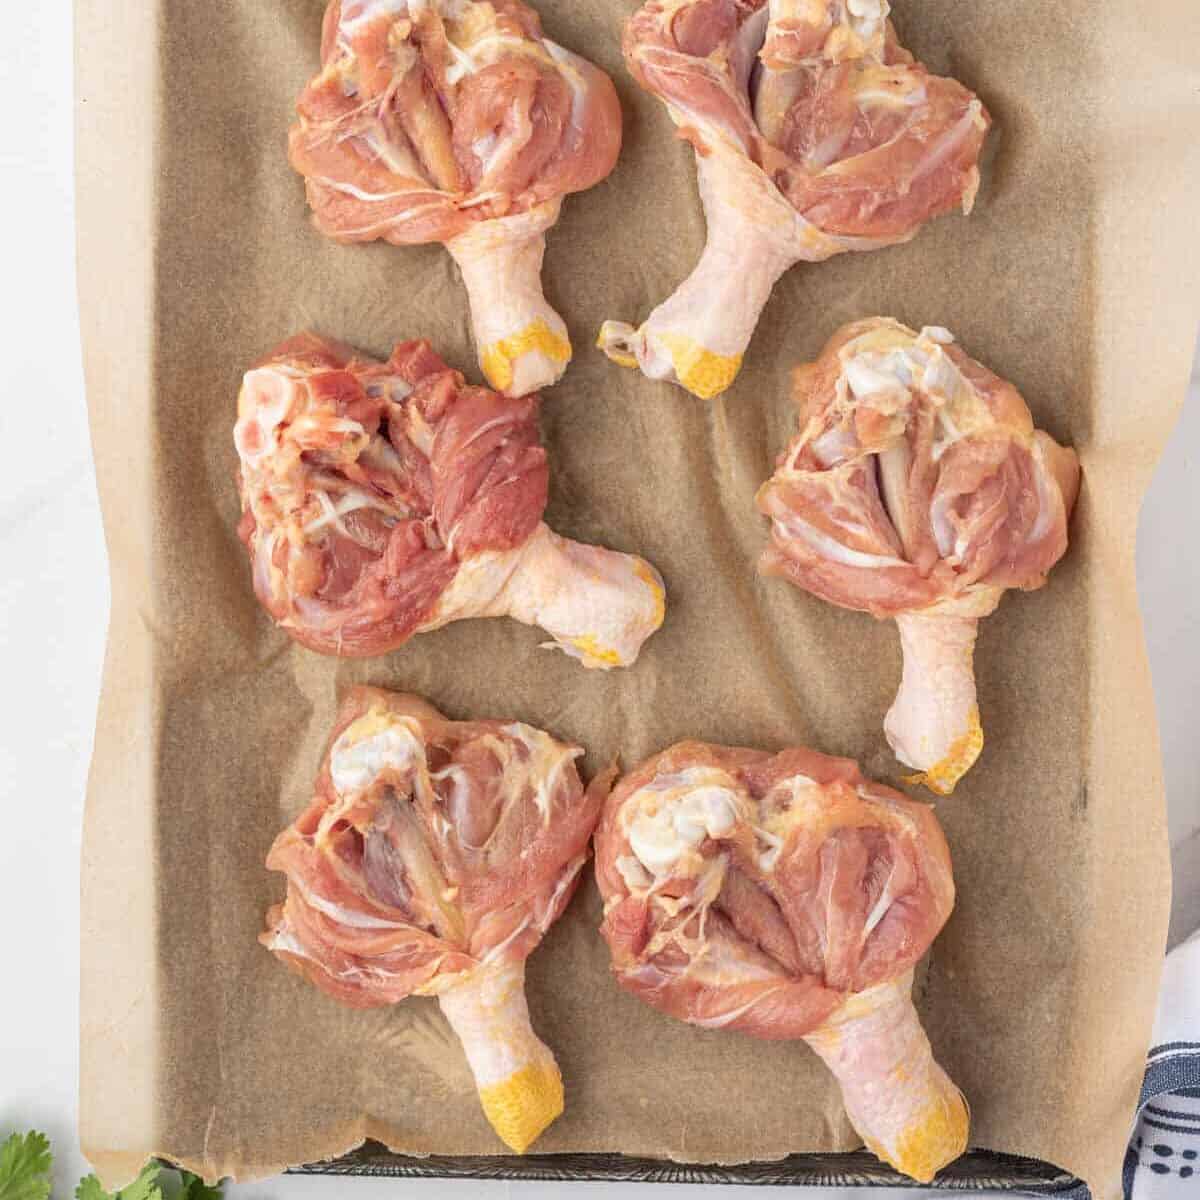 How to butterfly chicken legs for even cooking.